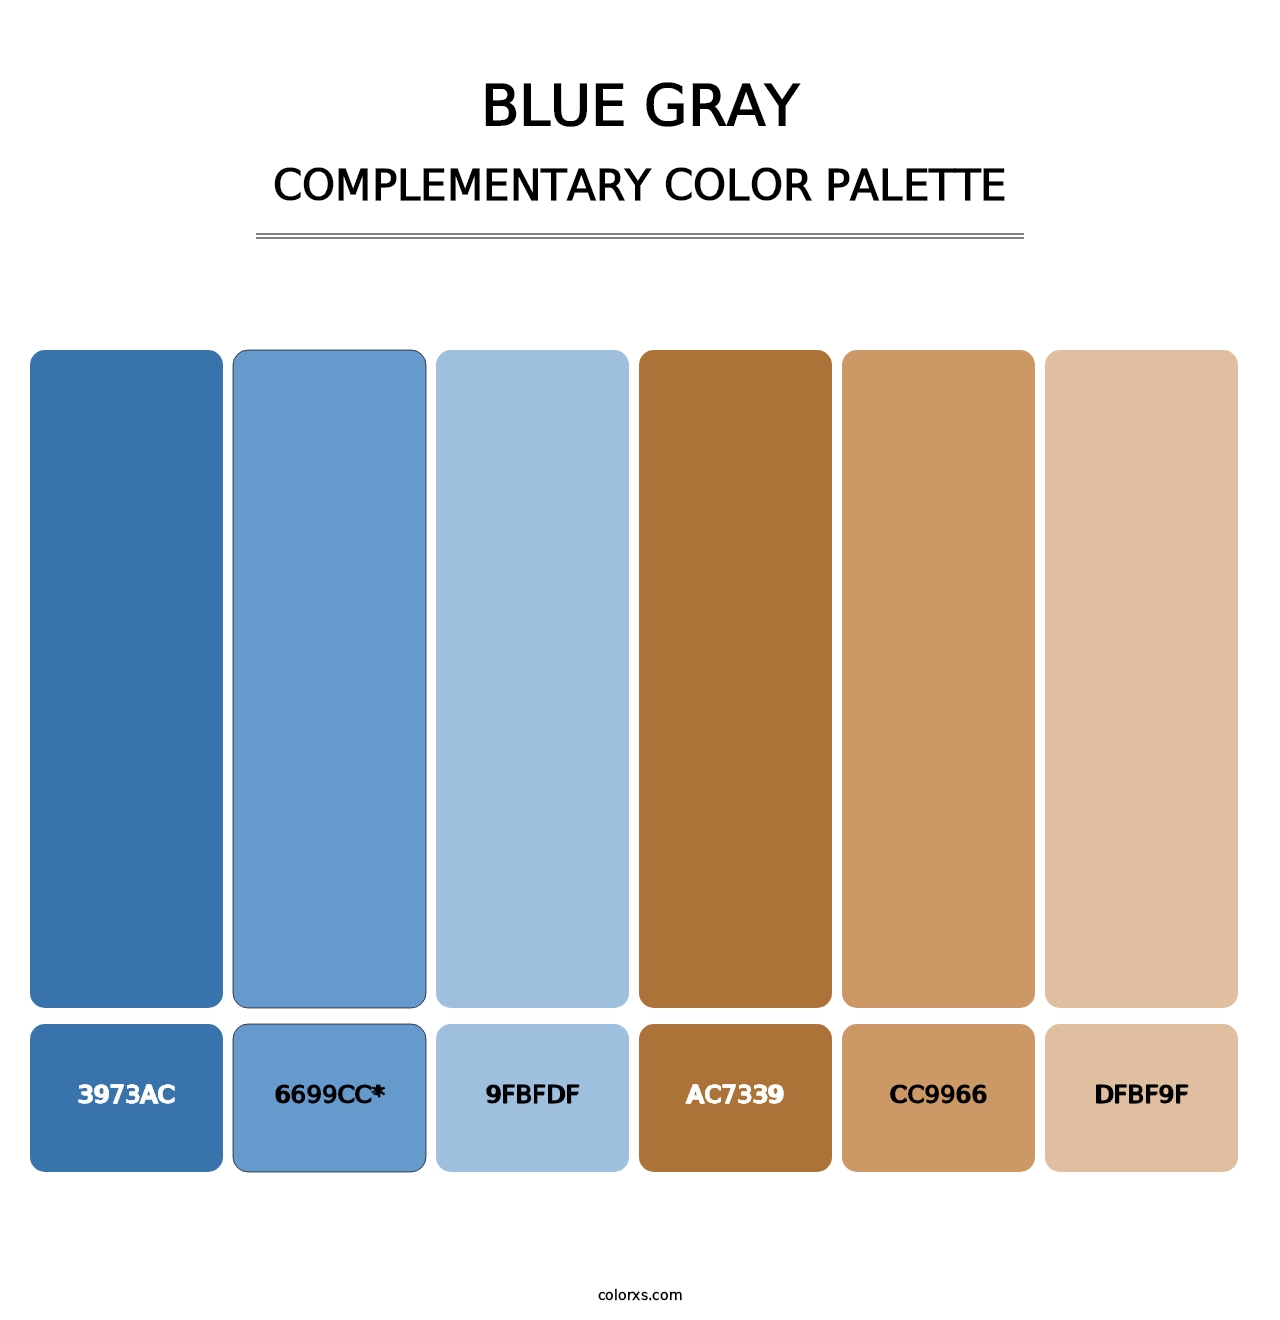 Blue Gray - Complementary Color Palette